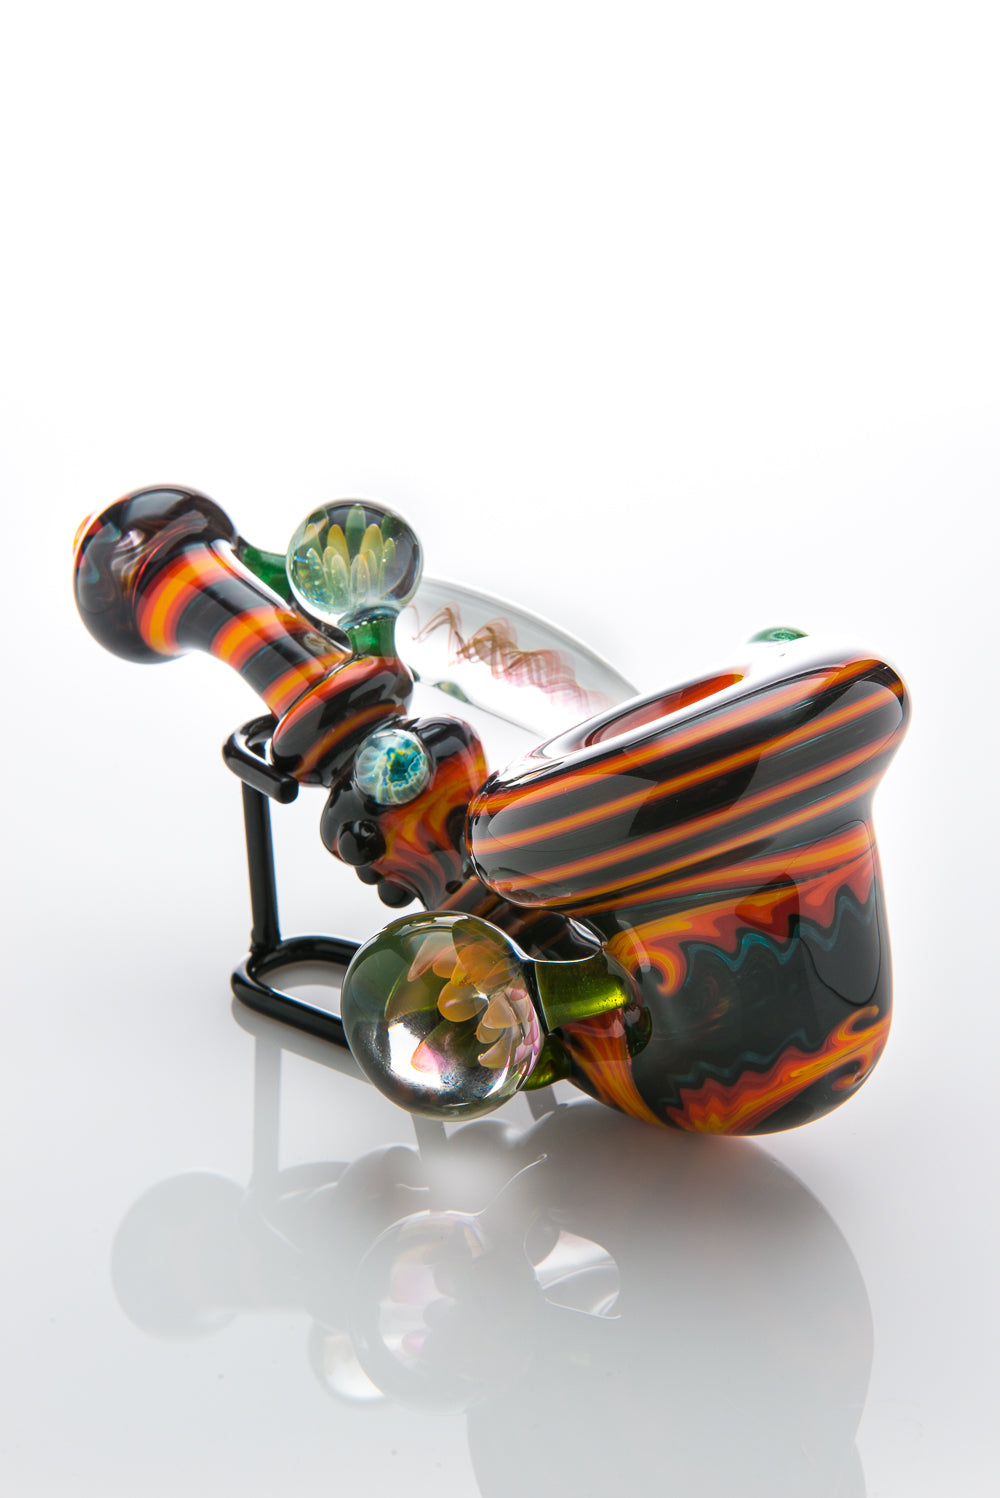 Sherlock with Ice Cycle Marble by Big Z